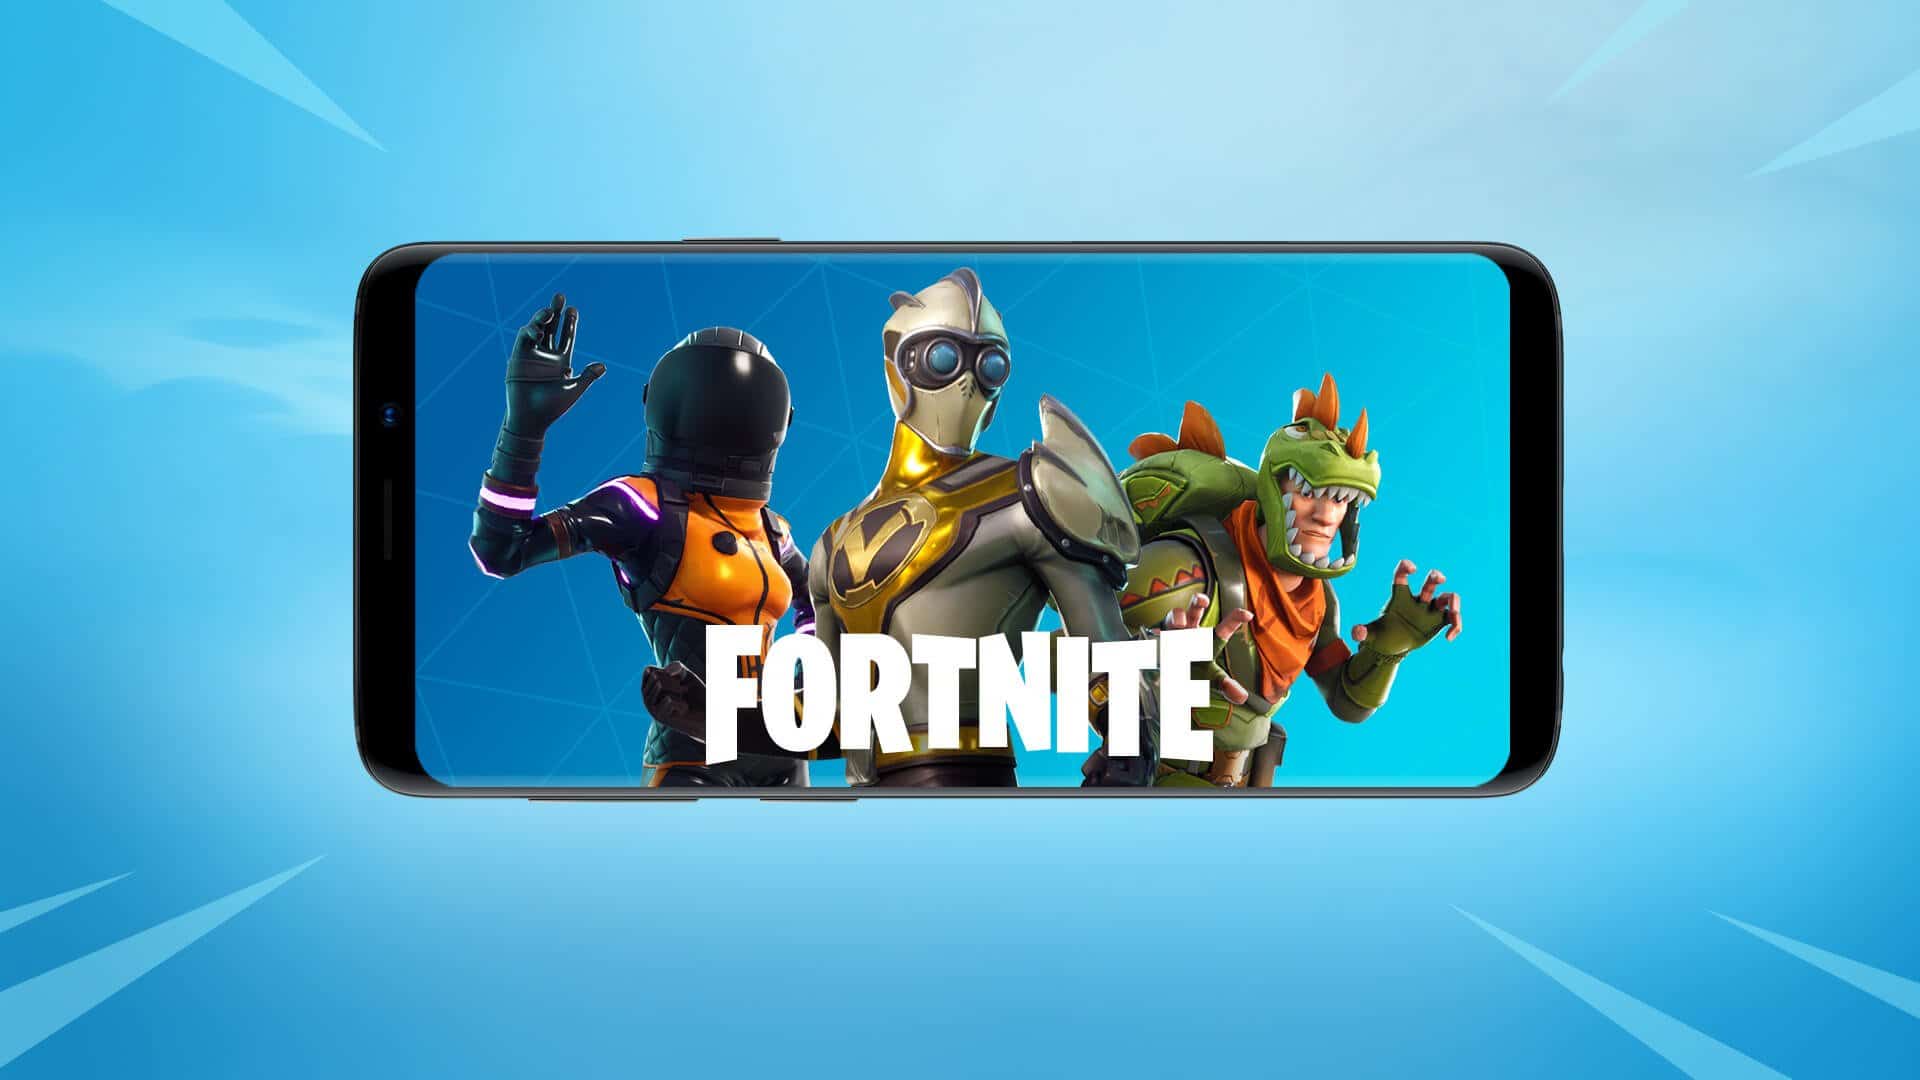 How To Use Airpods On Fortnite Mobile Fortnite Mobile Plan Detallado De Epic Games Para Volver A Iphone